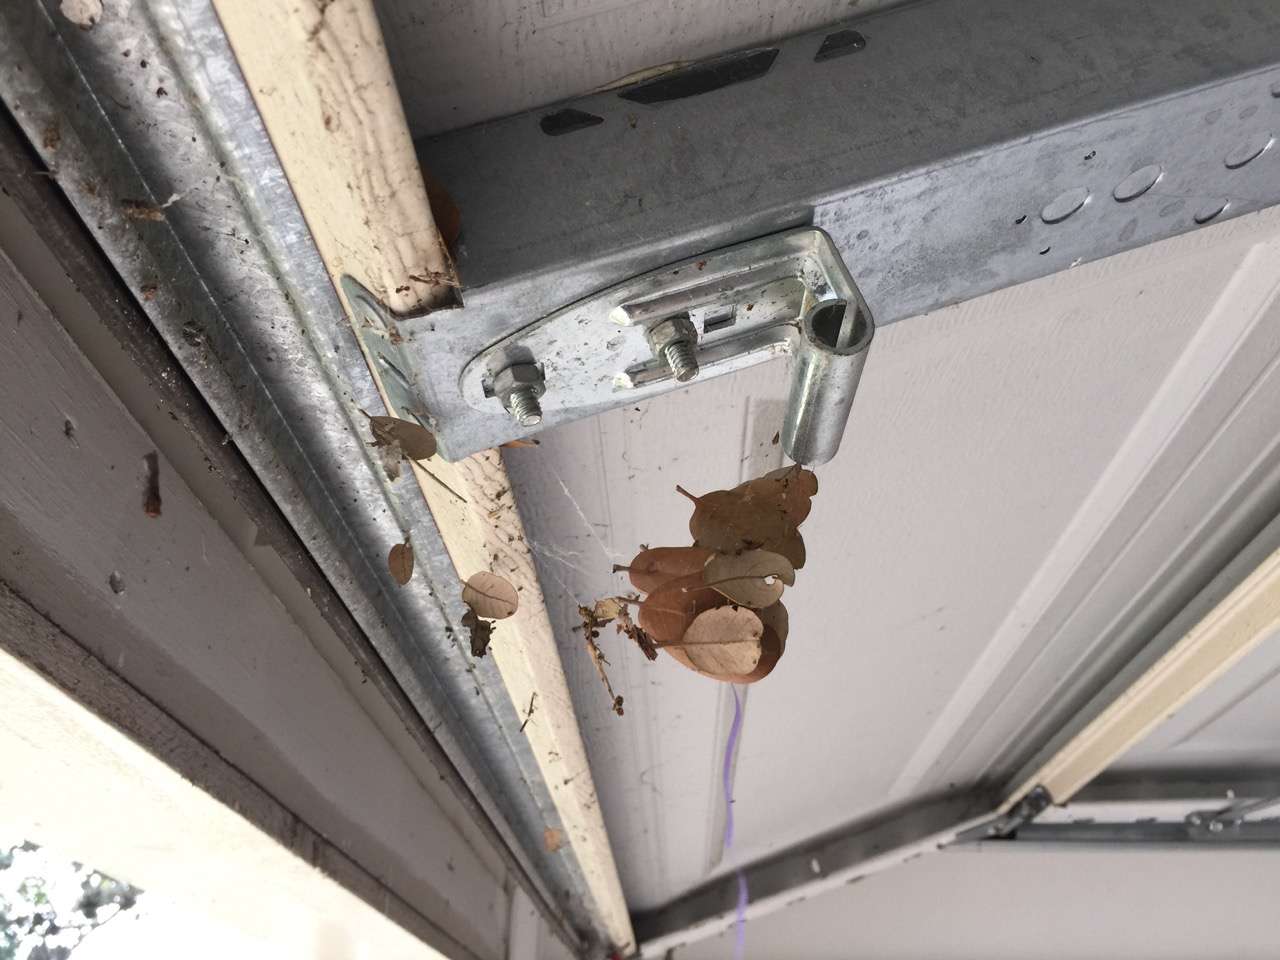 Something as simple as a leaf hanging off the bottom of your garage door can break the invisible beam on your safety sensors when closing causing it to reverse and go back up.